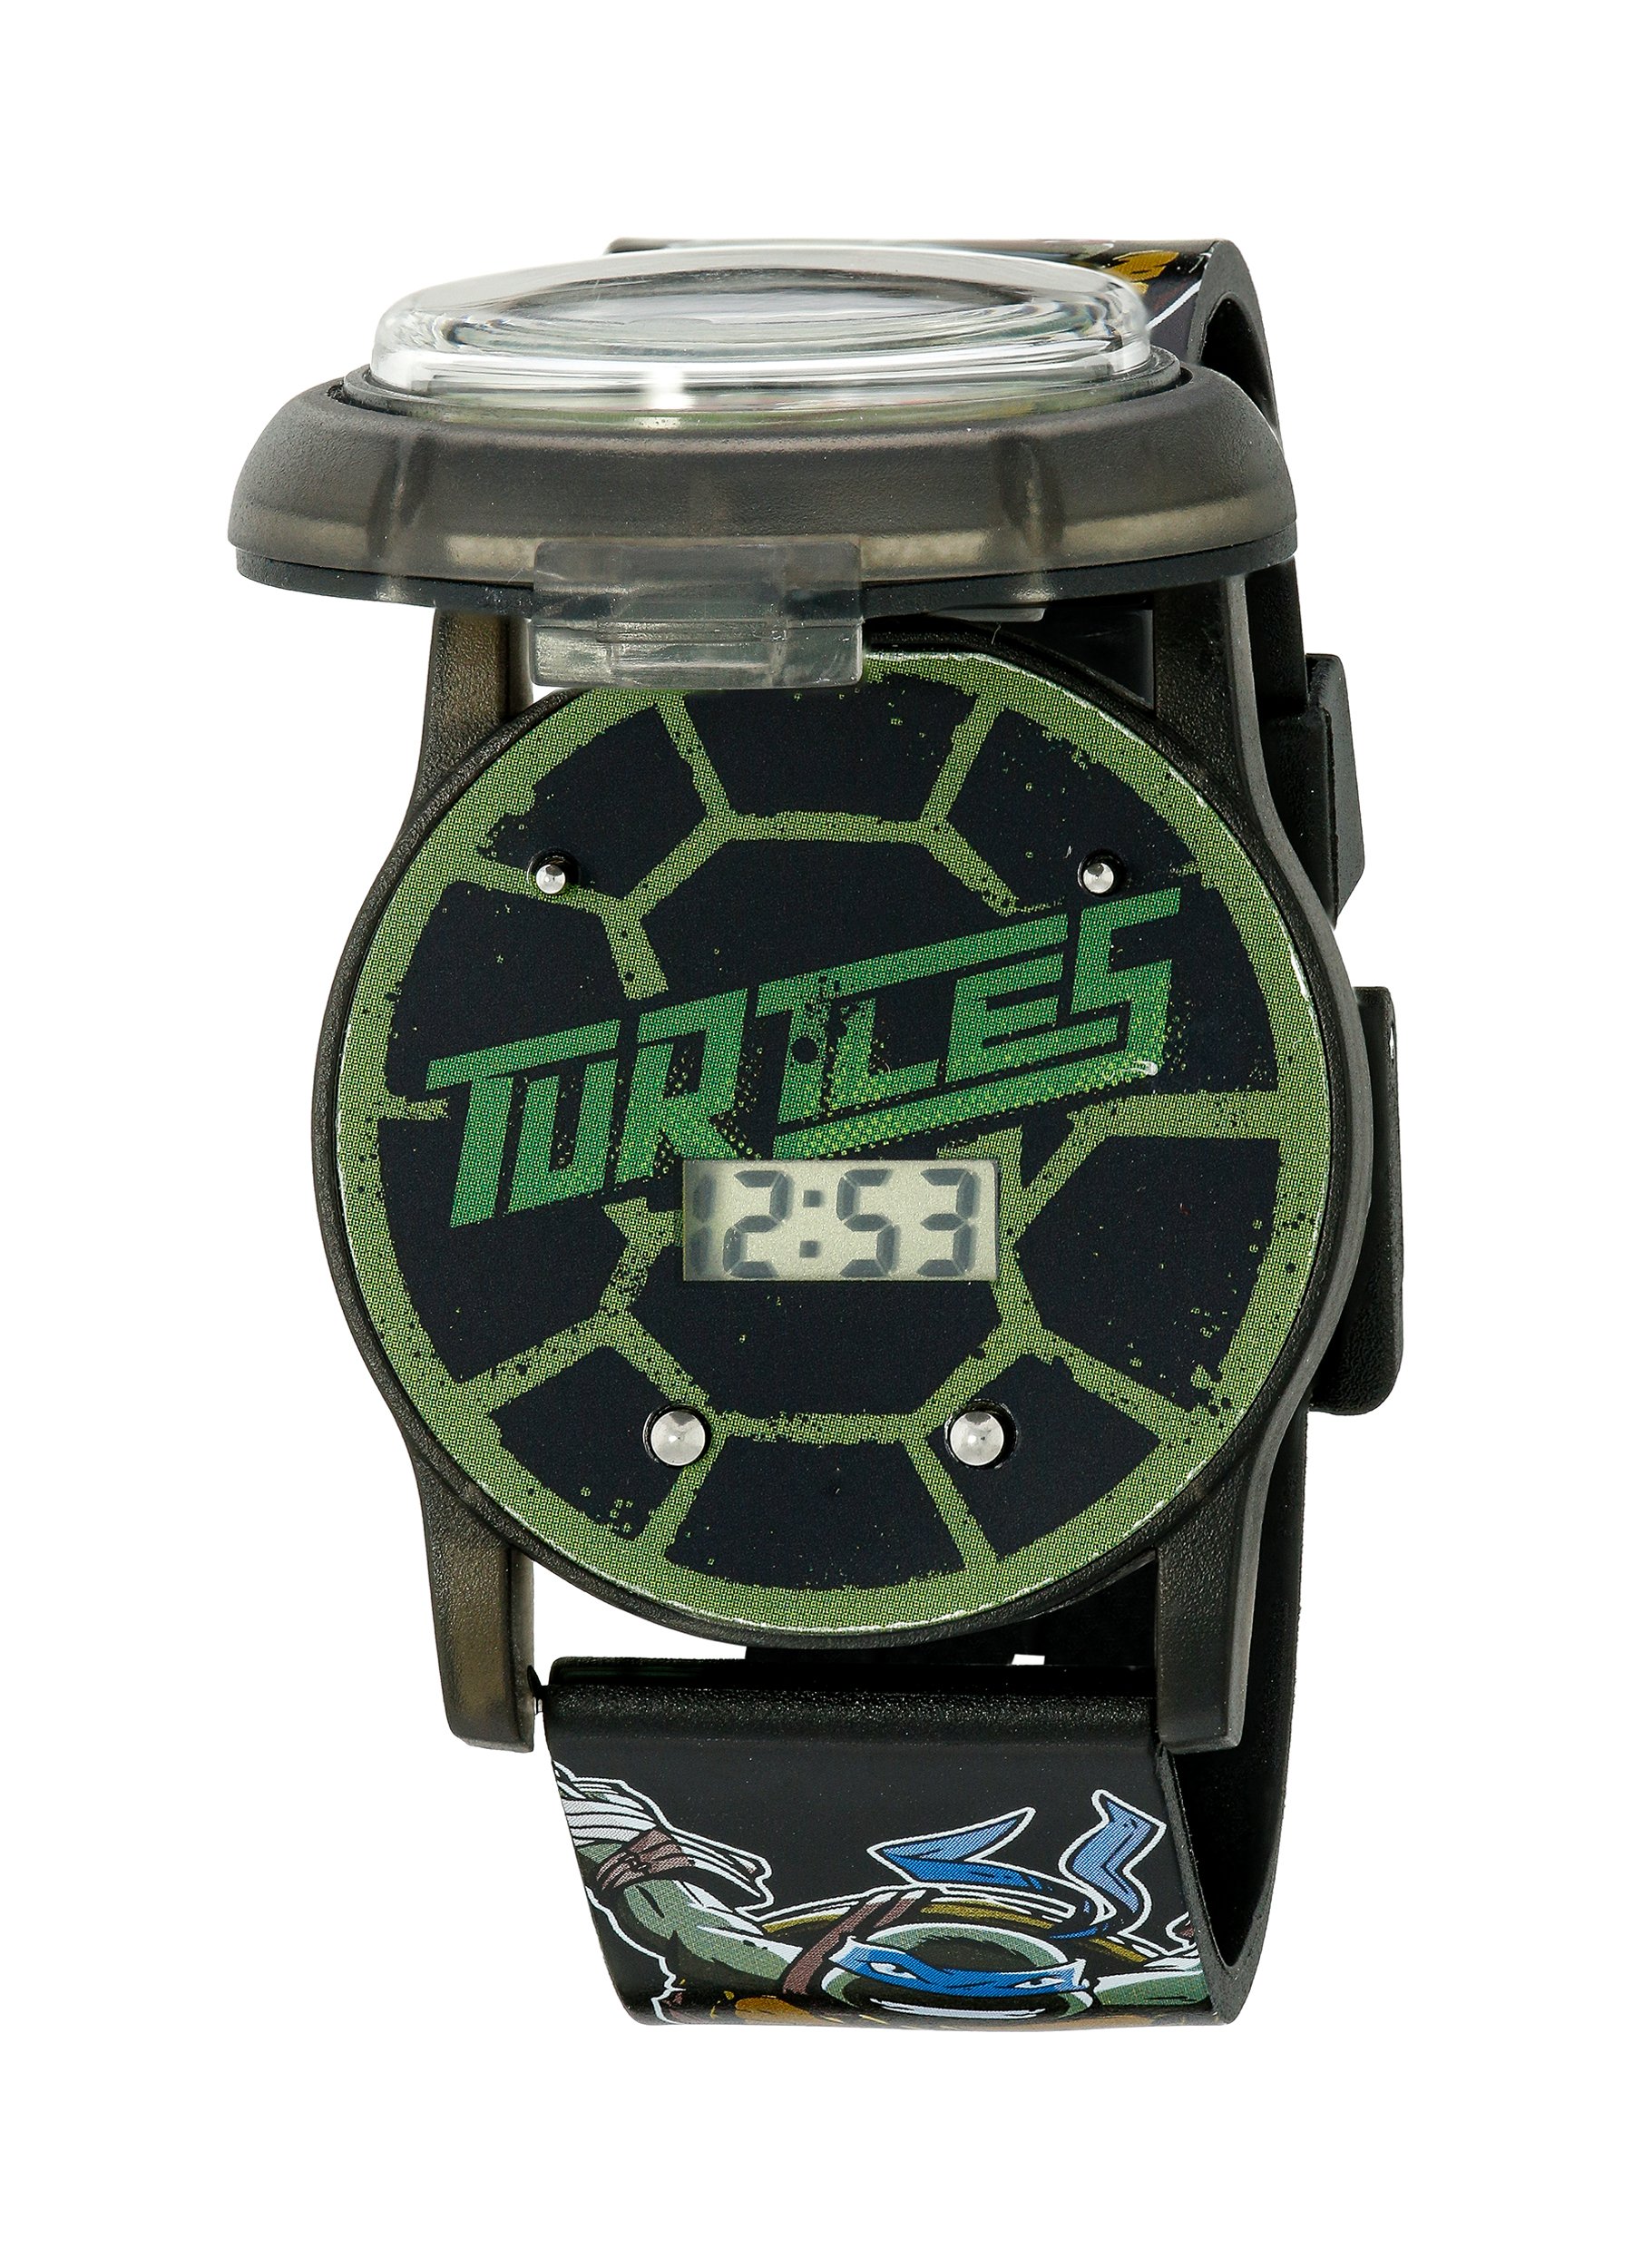 Accutime Ninja Turtles Kids' Digital Watch with Pop Open Top/Casing, Flashing LED Lights, Black Strap - Official TMNT Characters on The Top, Safe for Children - Model: TMN4205